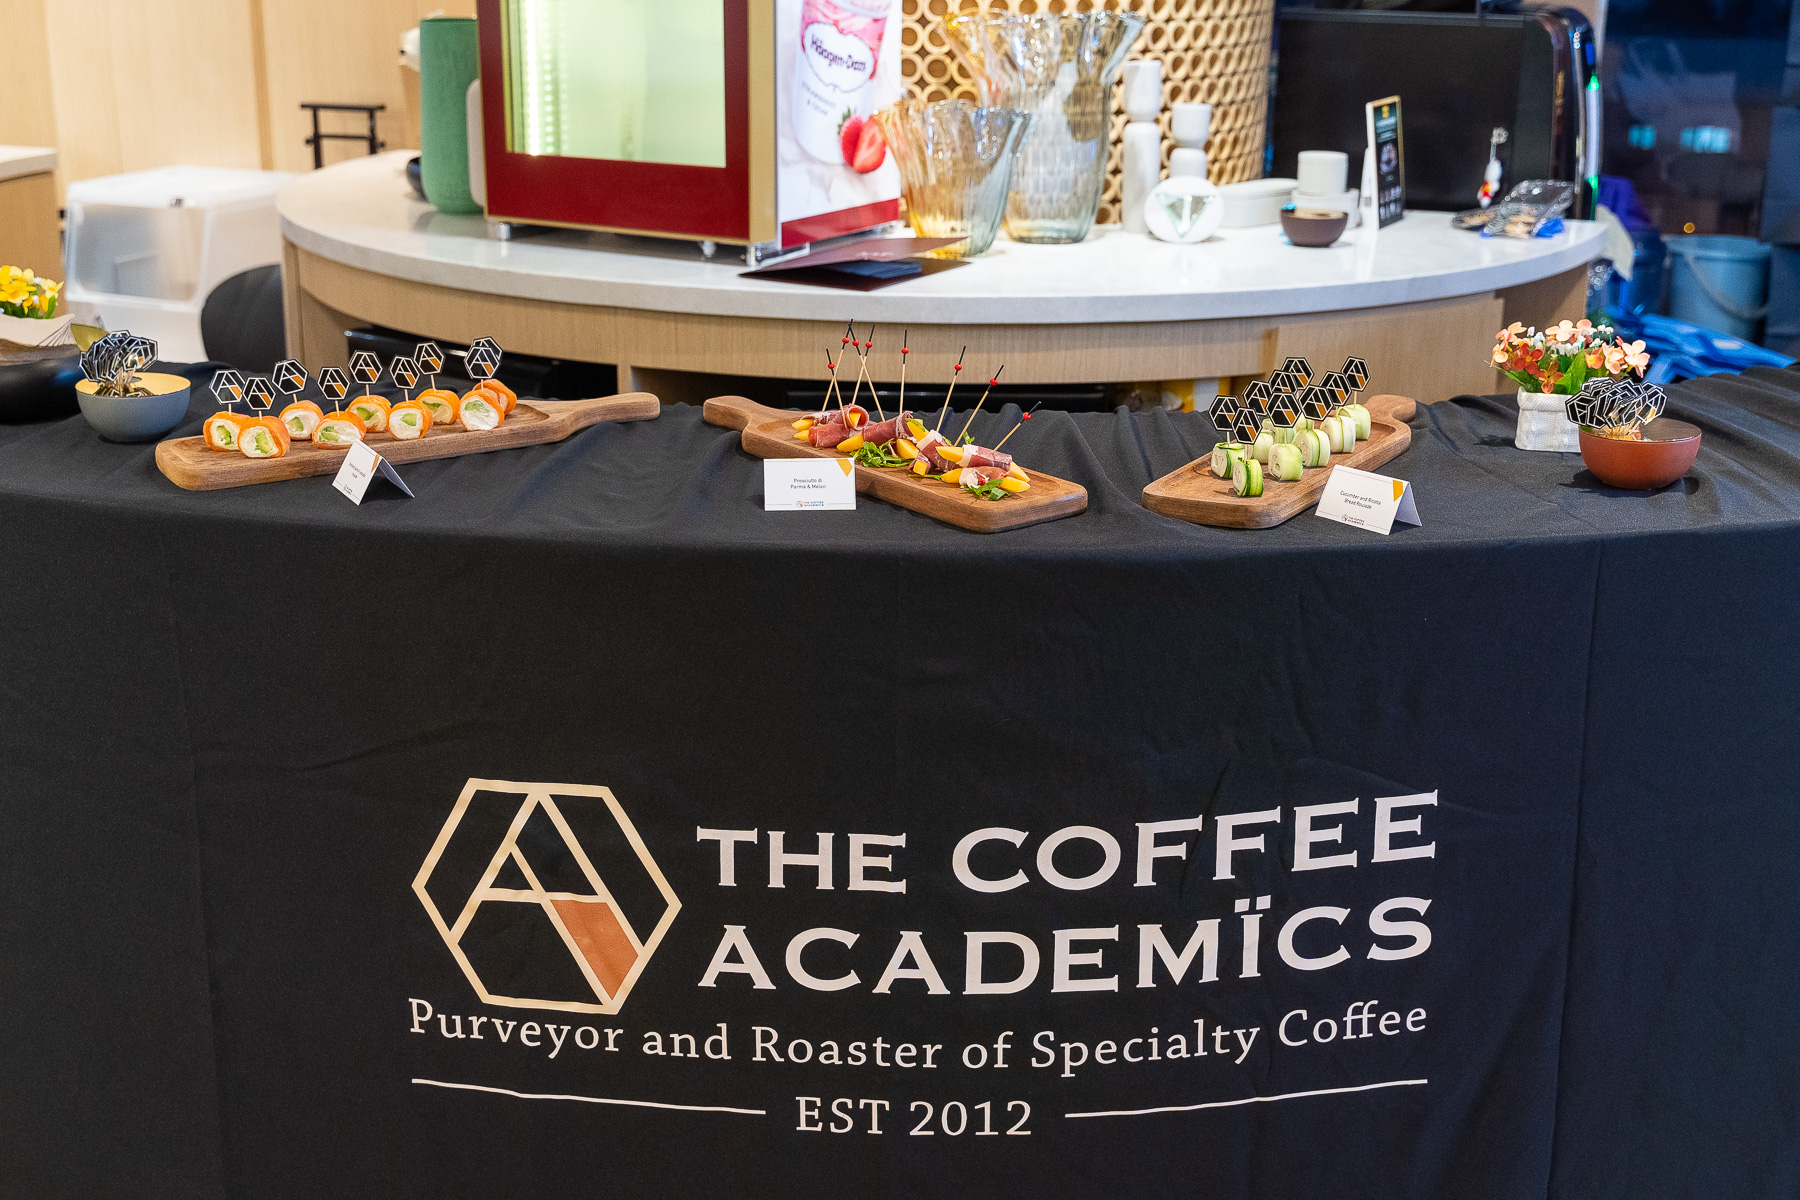 Creative canapés catering for the World Heart Day 2019! Thank you 1010 for aving us in the seminar for raising awareness and helping friends and family live longer lives with smart technologies.☕️⌚️